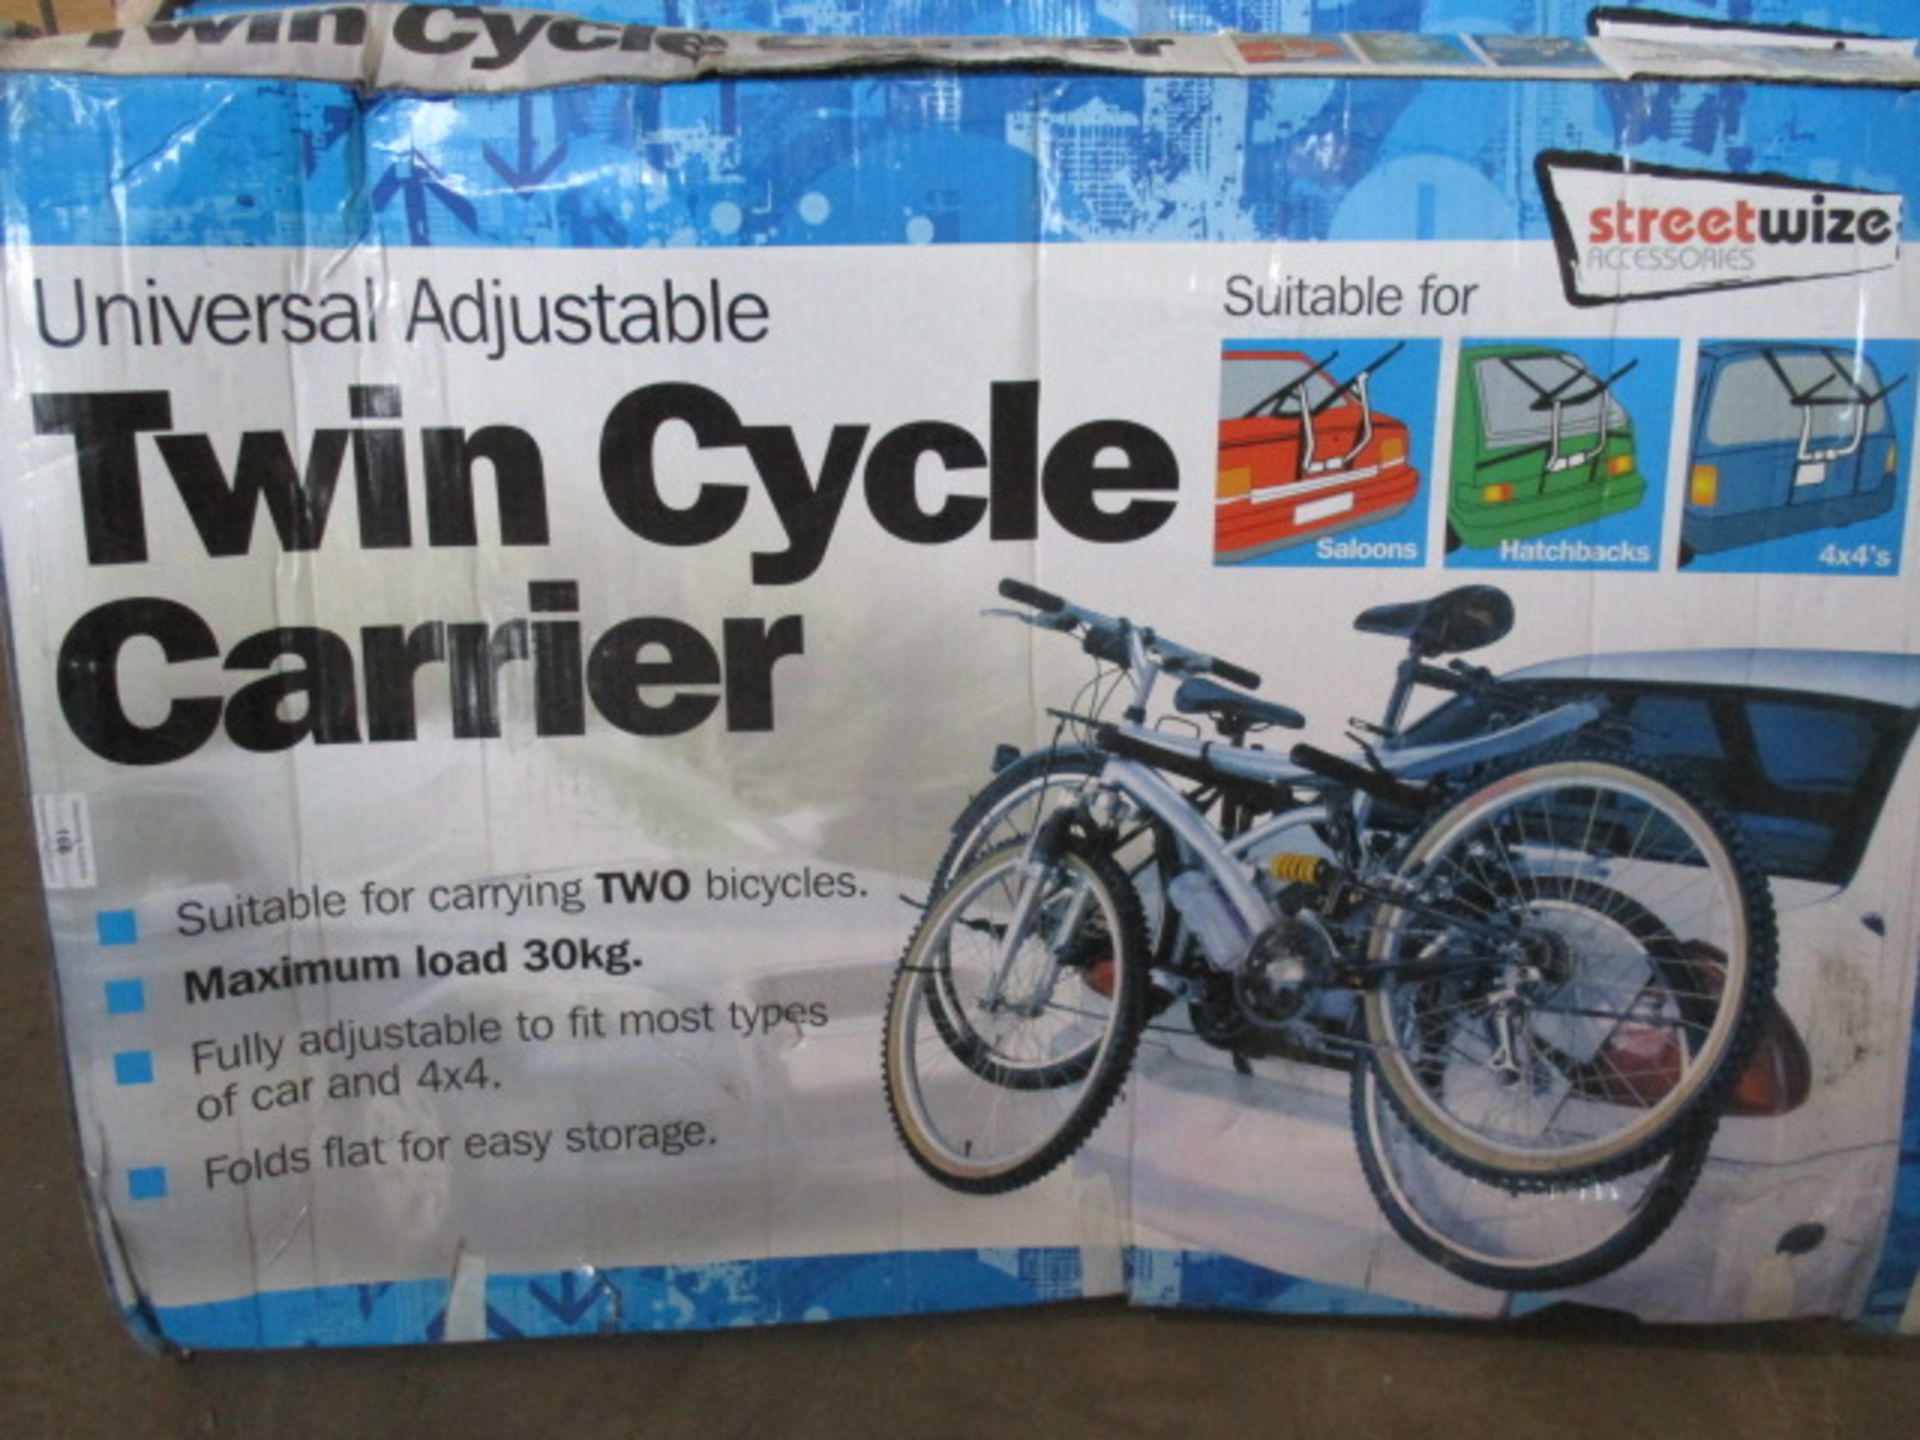 Twin cycle carrier system rrp 24.99.